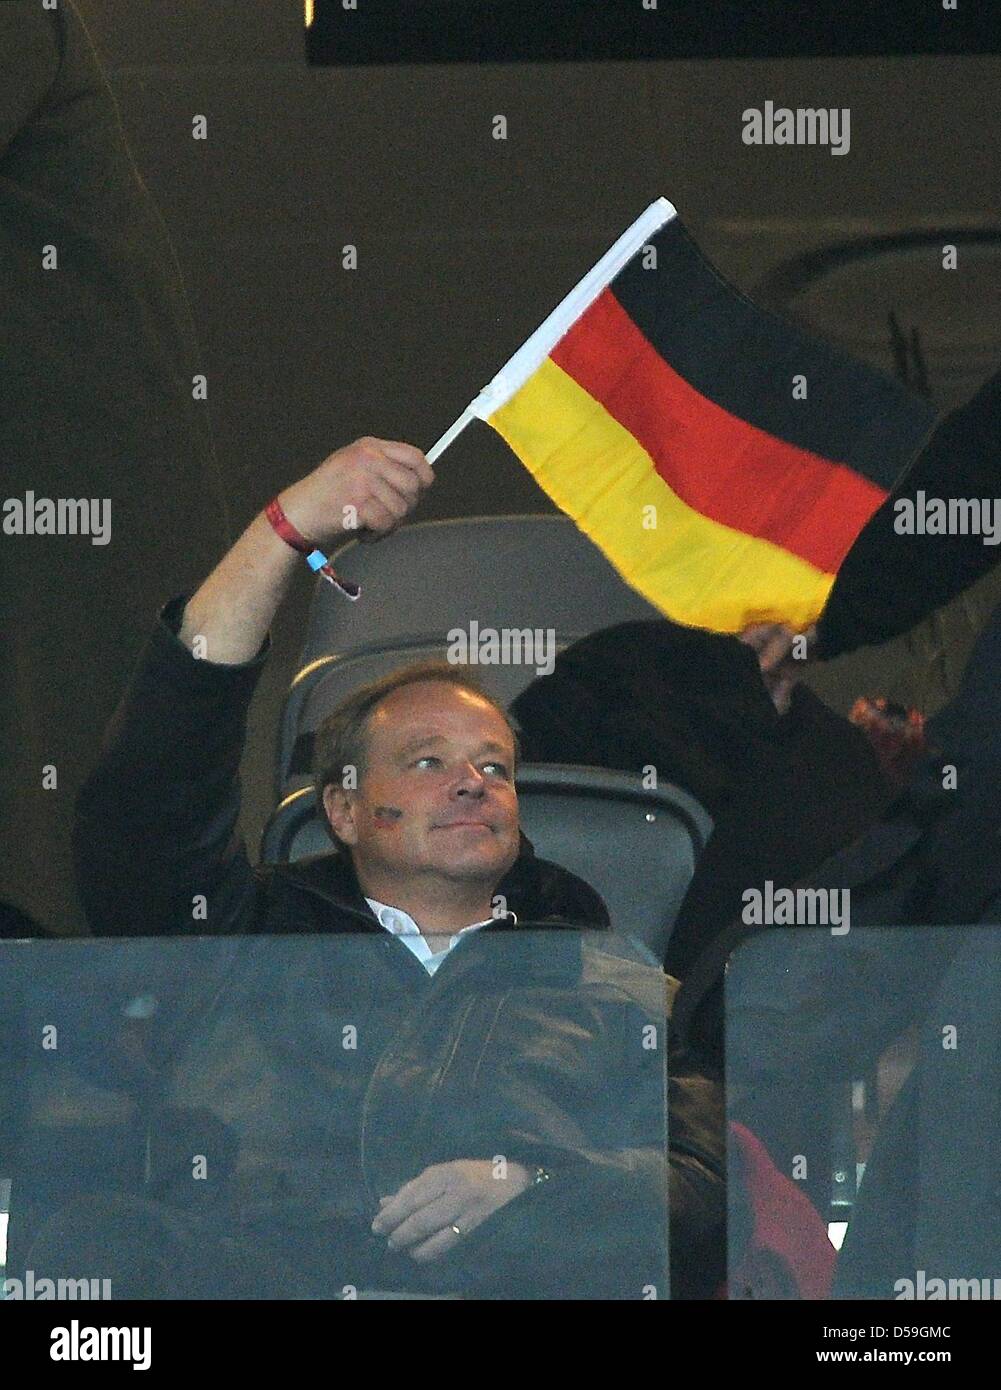 Dirk Niebel (FDP), German Federal Minister of Economic Cooperation and Development, waves a German flag during the 2010 FIFA World Cup group D match between Ghana and Germany at Soccer City, Johannesburg, South Africa 23 June 2010. Photo: Marcus Brandt dpa - Please refer to http://dpaq.de/FIFA-WM2010-TC Stock Photo